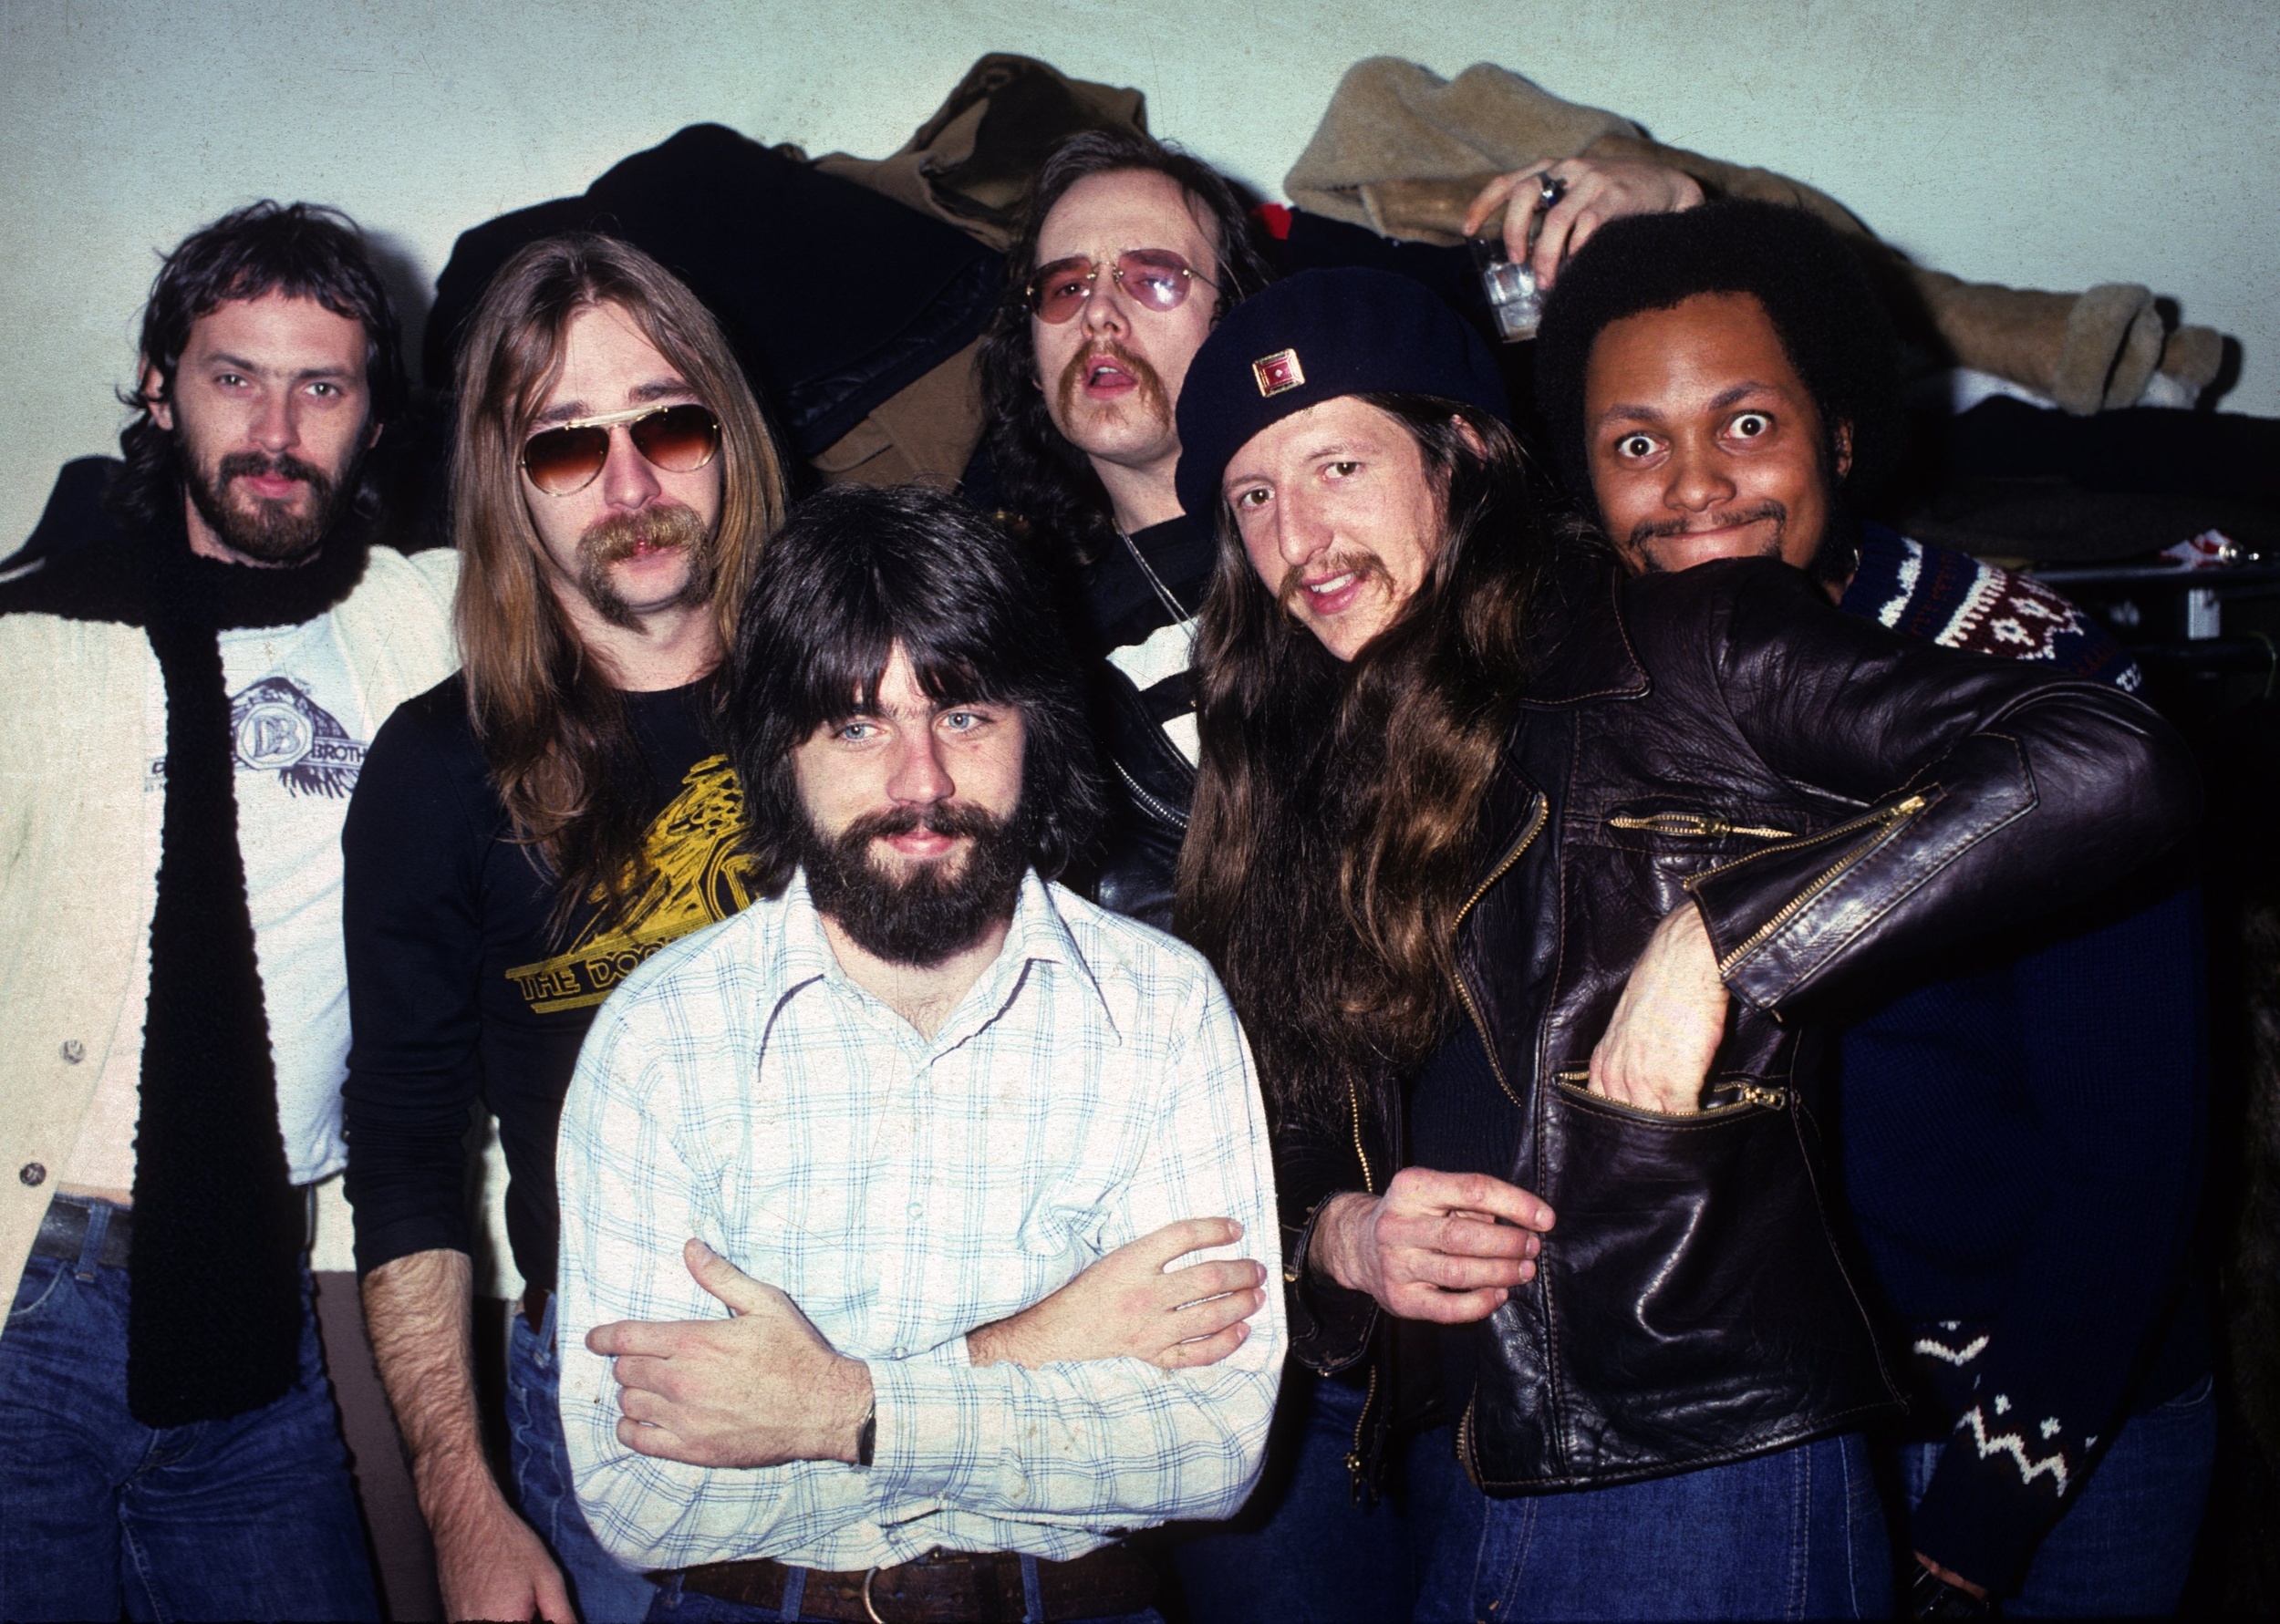 <p>The Doobie Brothers were a rather hard-rocking outfit before Michael McDonald joined up in the mid-1970s. The band was in need of an established songwriter, and McDonald delivered. However, with a more mellow, synthesizer/electric piano-driven sound that produced soft-rock gems like this one. Co-written by Kenny Loggins, who put out a version for himself, <a href="https://www.youtube.com/watch?v=qKYQNtF11eg">"What a Fool Believes"</a> hit No. 1 on the Hot 100 in April 1979. Several critics have cited this as the best song in the vast Doobie Brothers catalog. </p><p><a href='https://www.msn.com/en-us/community/channel/vid-cj9pqbr0vn9in2b6ddcd8sfgpfq6x6utp44fssrv6mc2gtybw0us'>Follow us on MSN to see more of our exclusive entertainment content.</a></p>